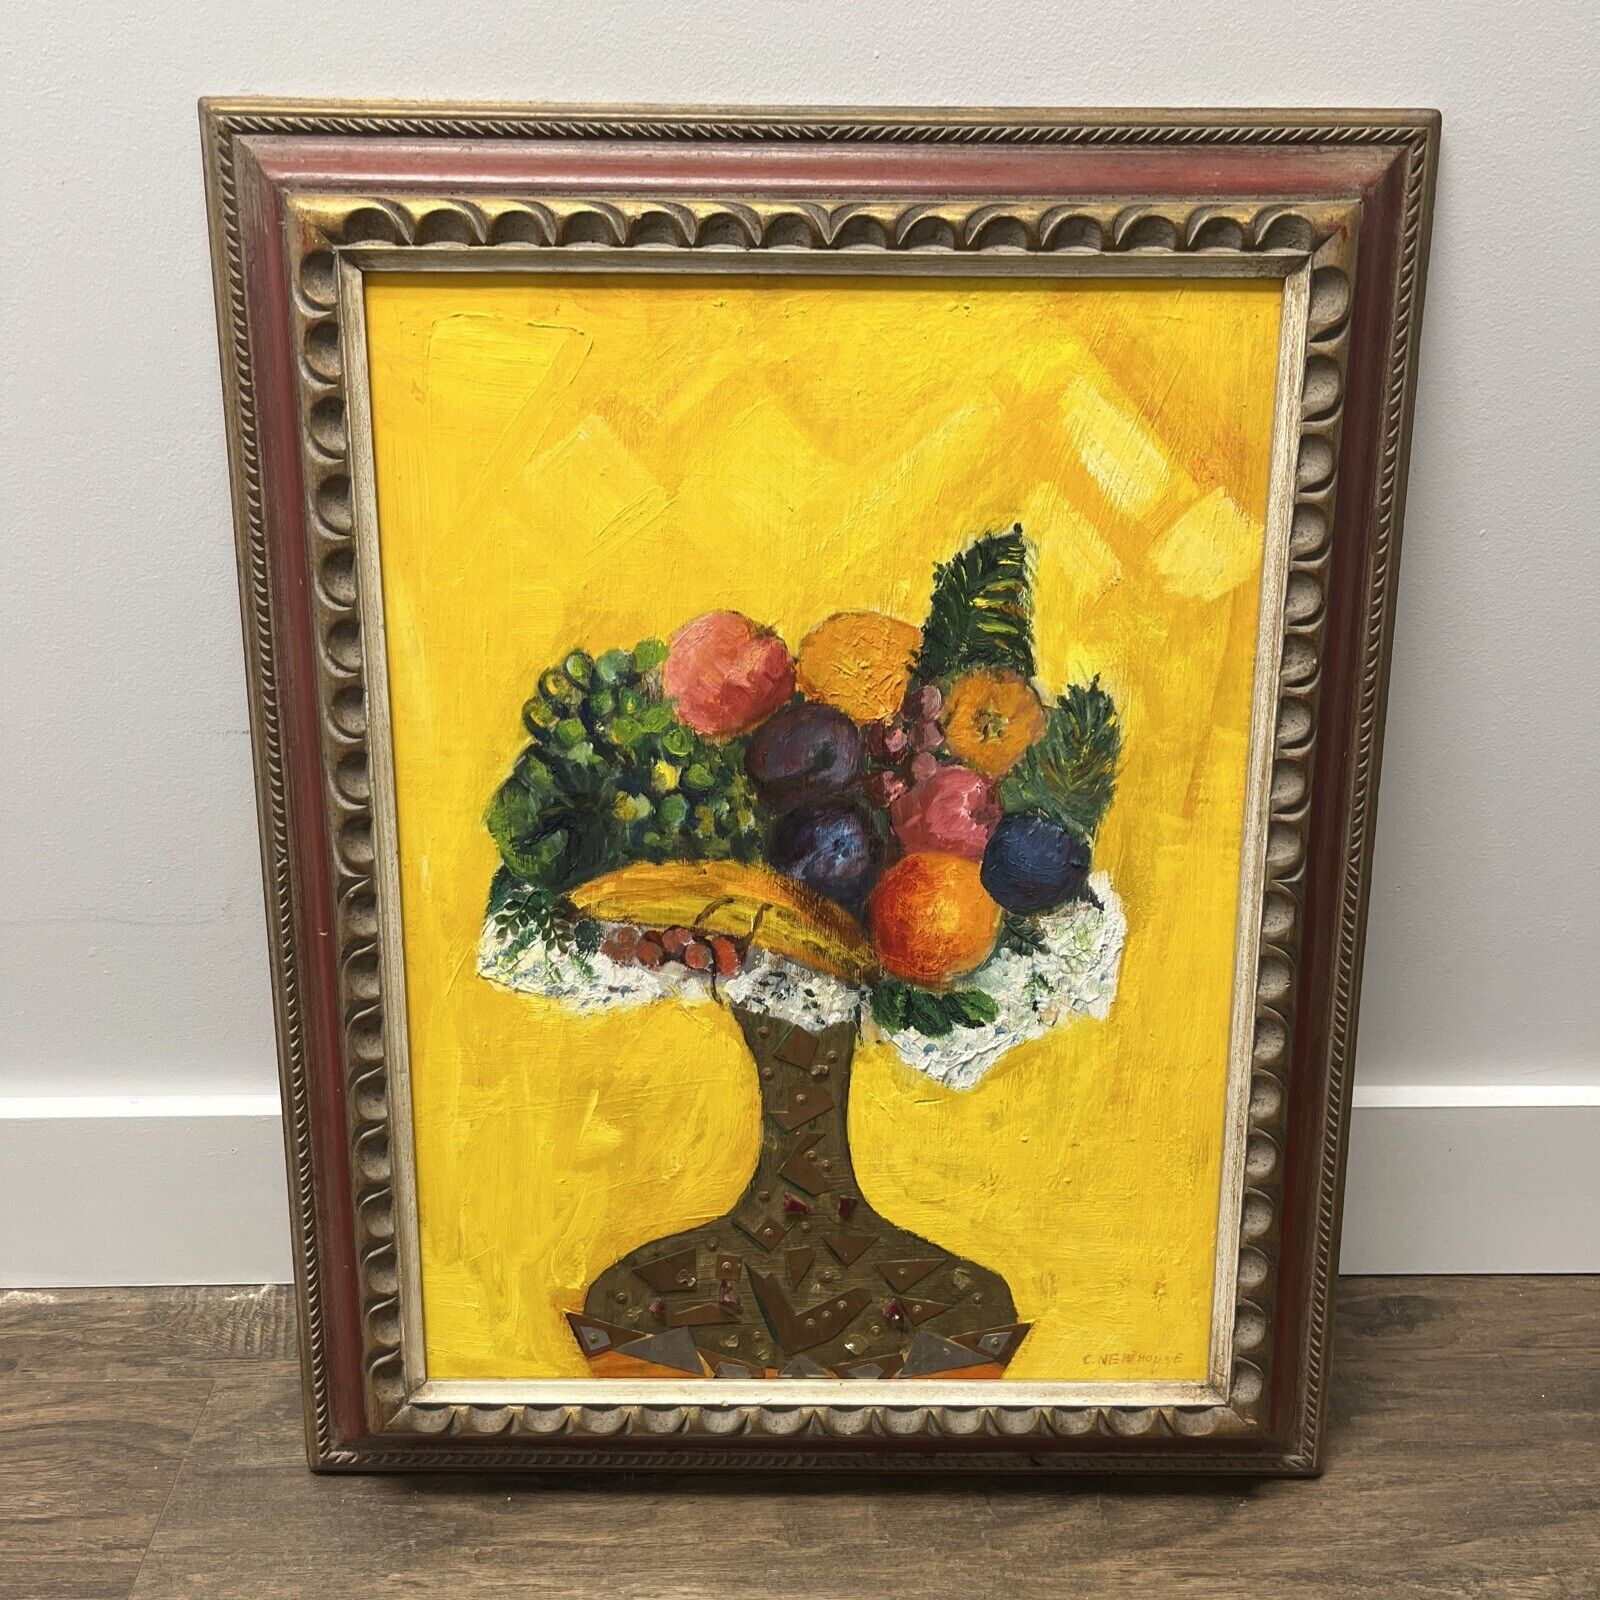 Caroline Newhouse (American, 1910-2003) Original Mixed Media Oil Painting Framed